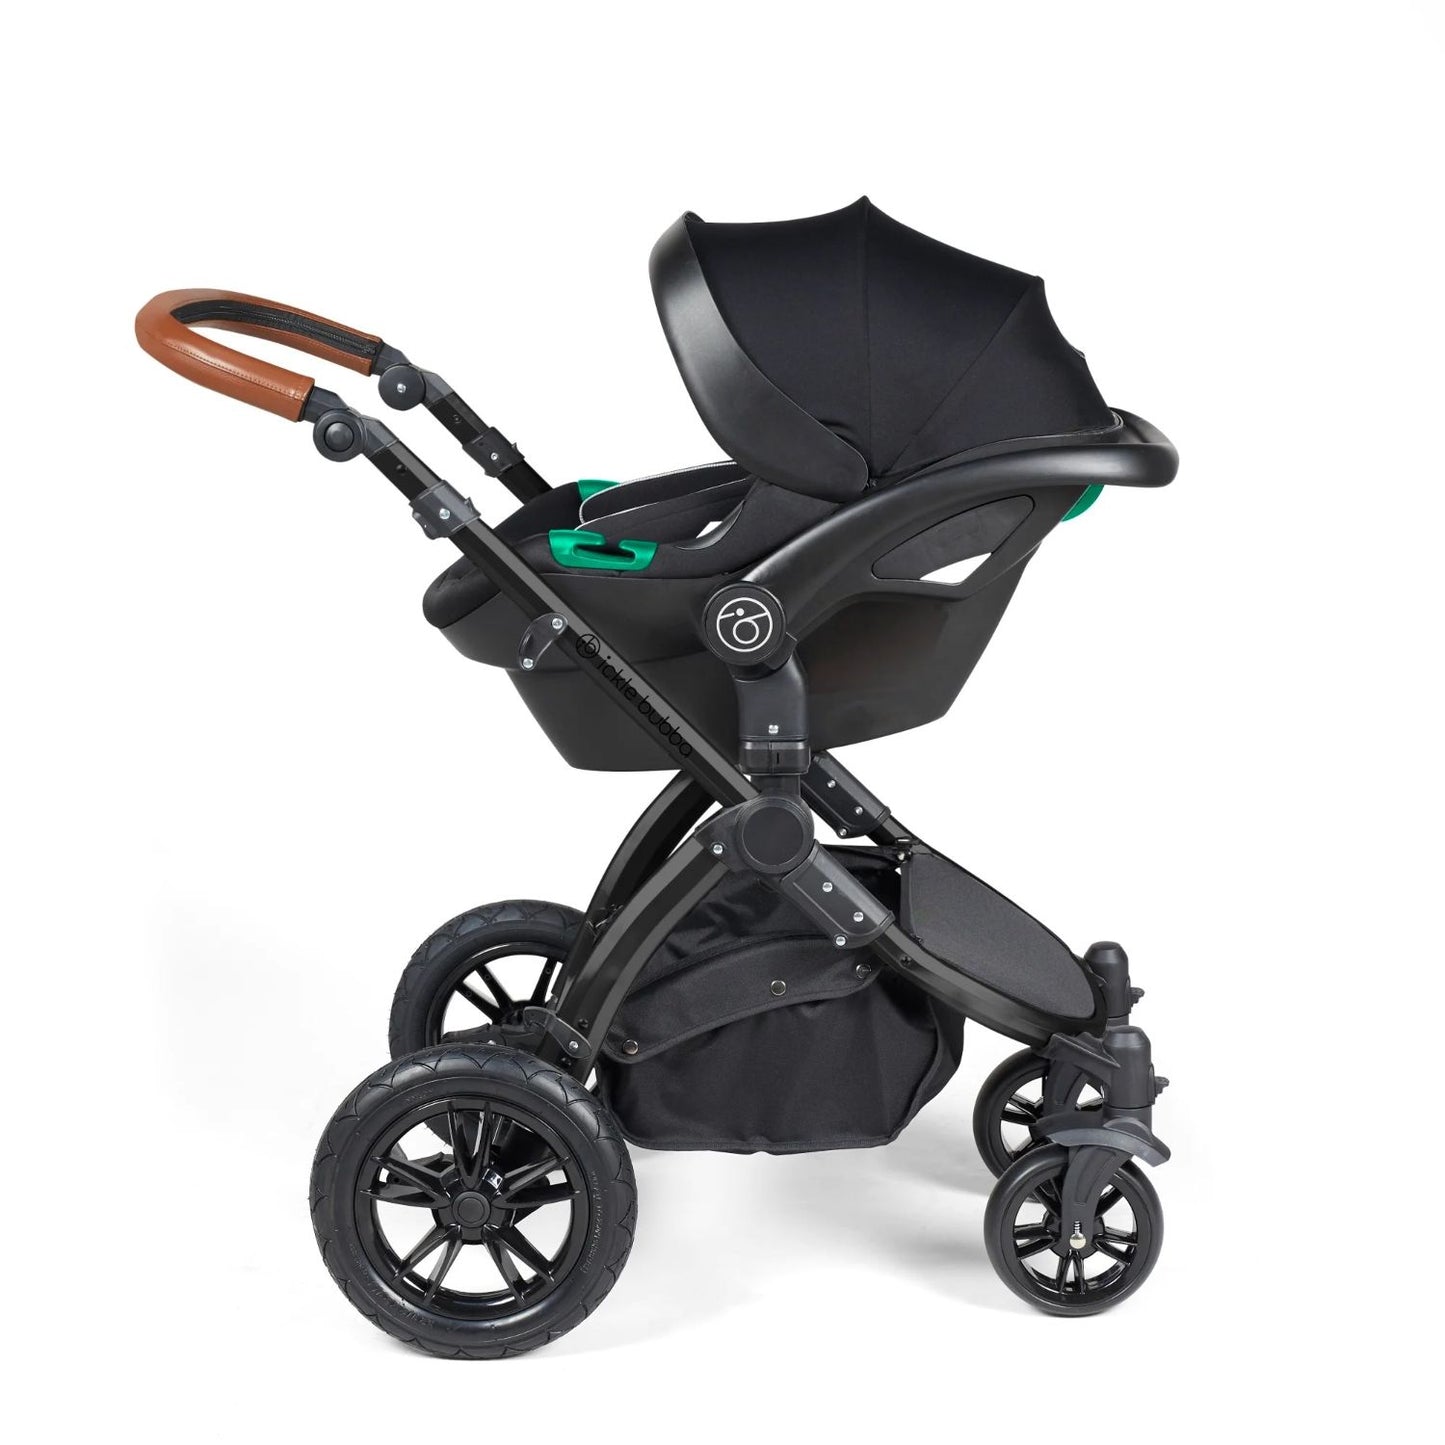 Ickle Bubba Stomp Luxe Pushchair with Stratus i-Size car seat attached in Midnight black colour with tan handle